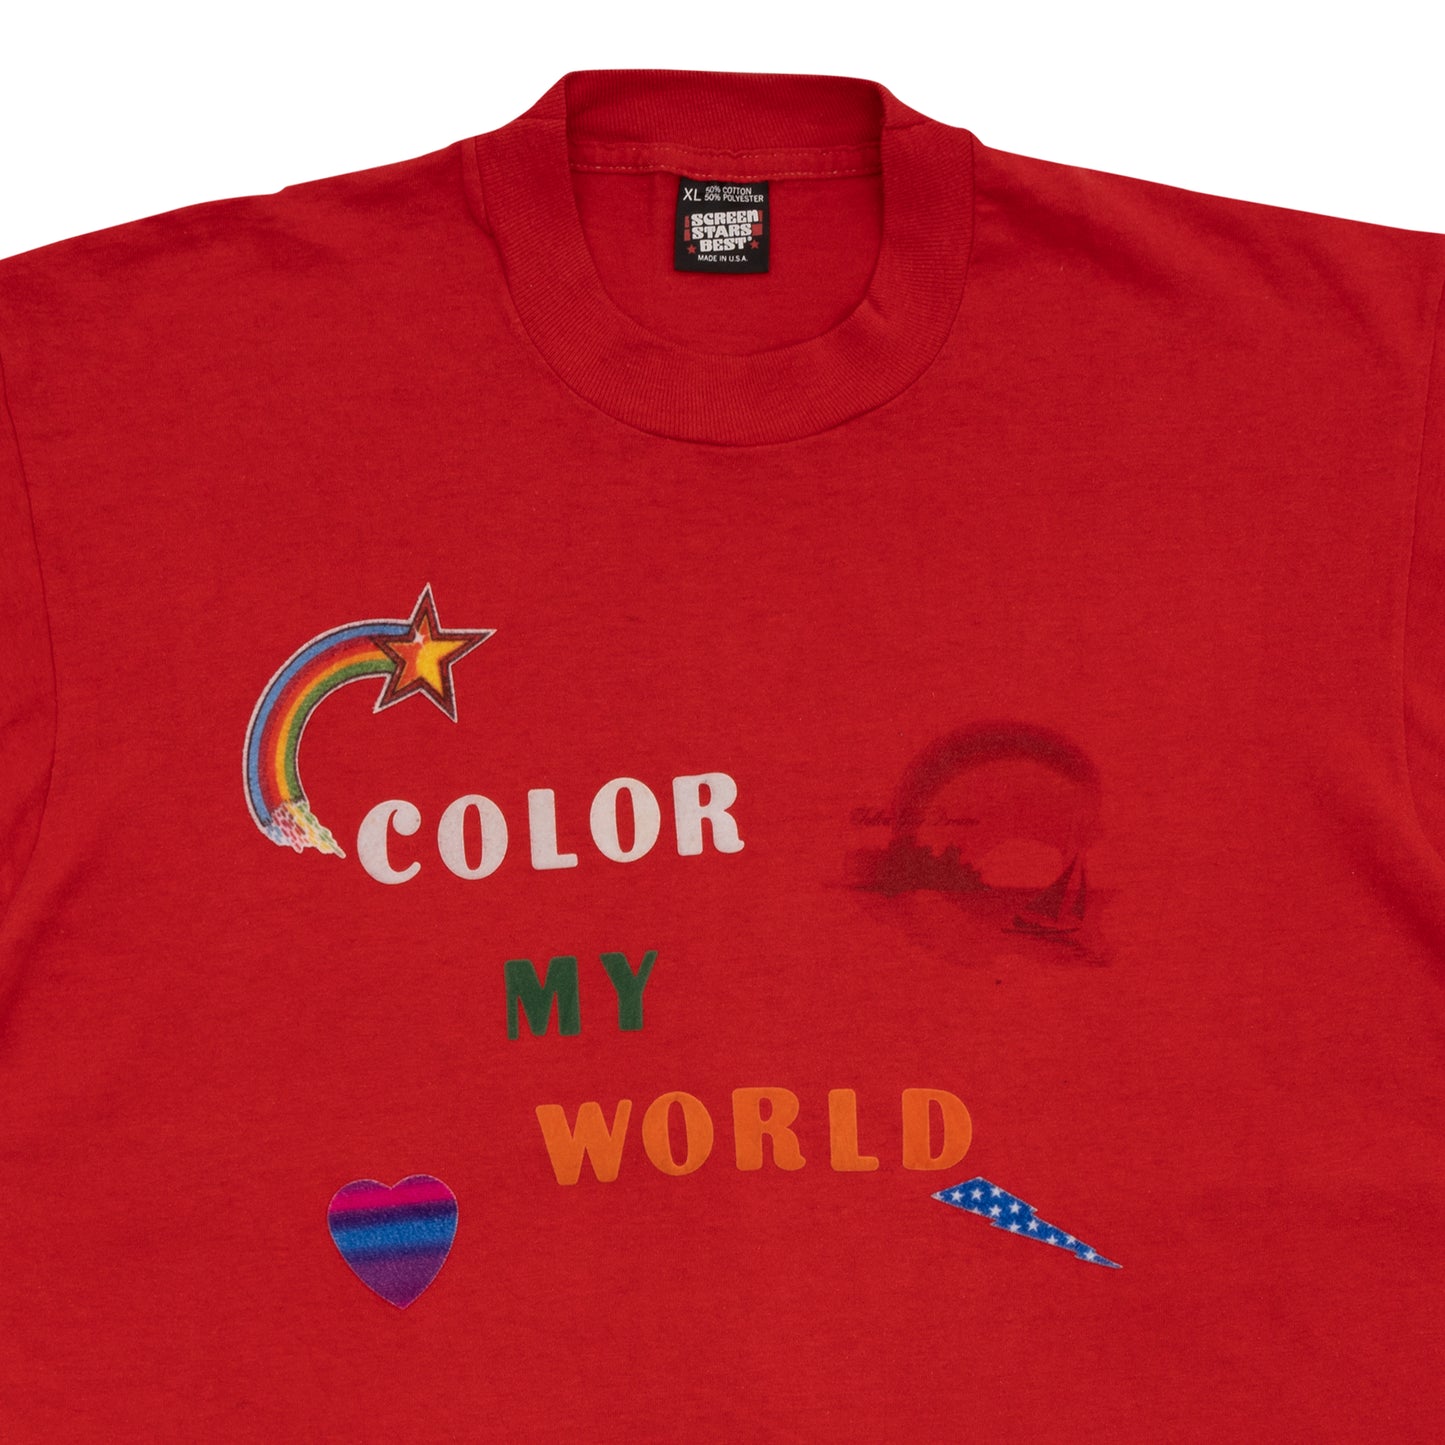 COLOR MY WORLD T-SHIRT